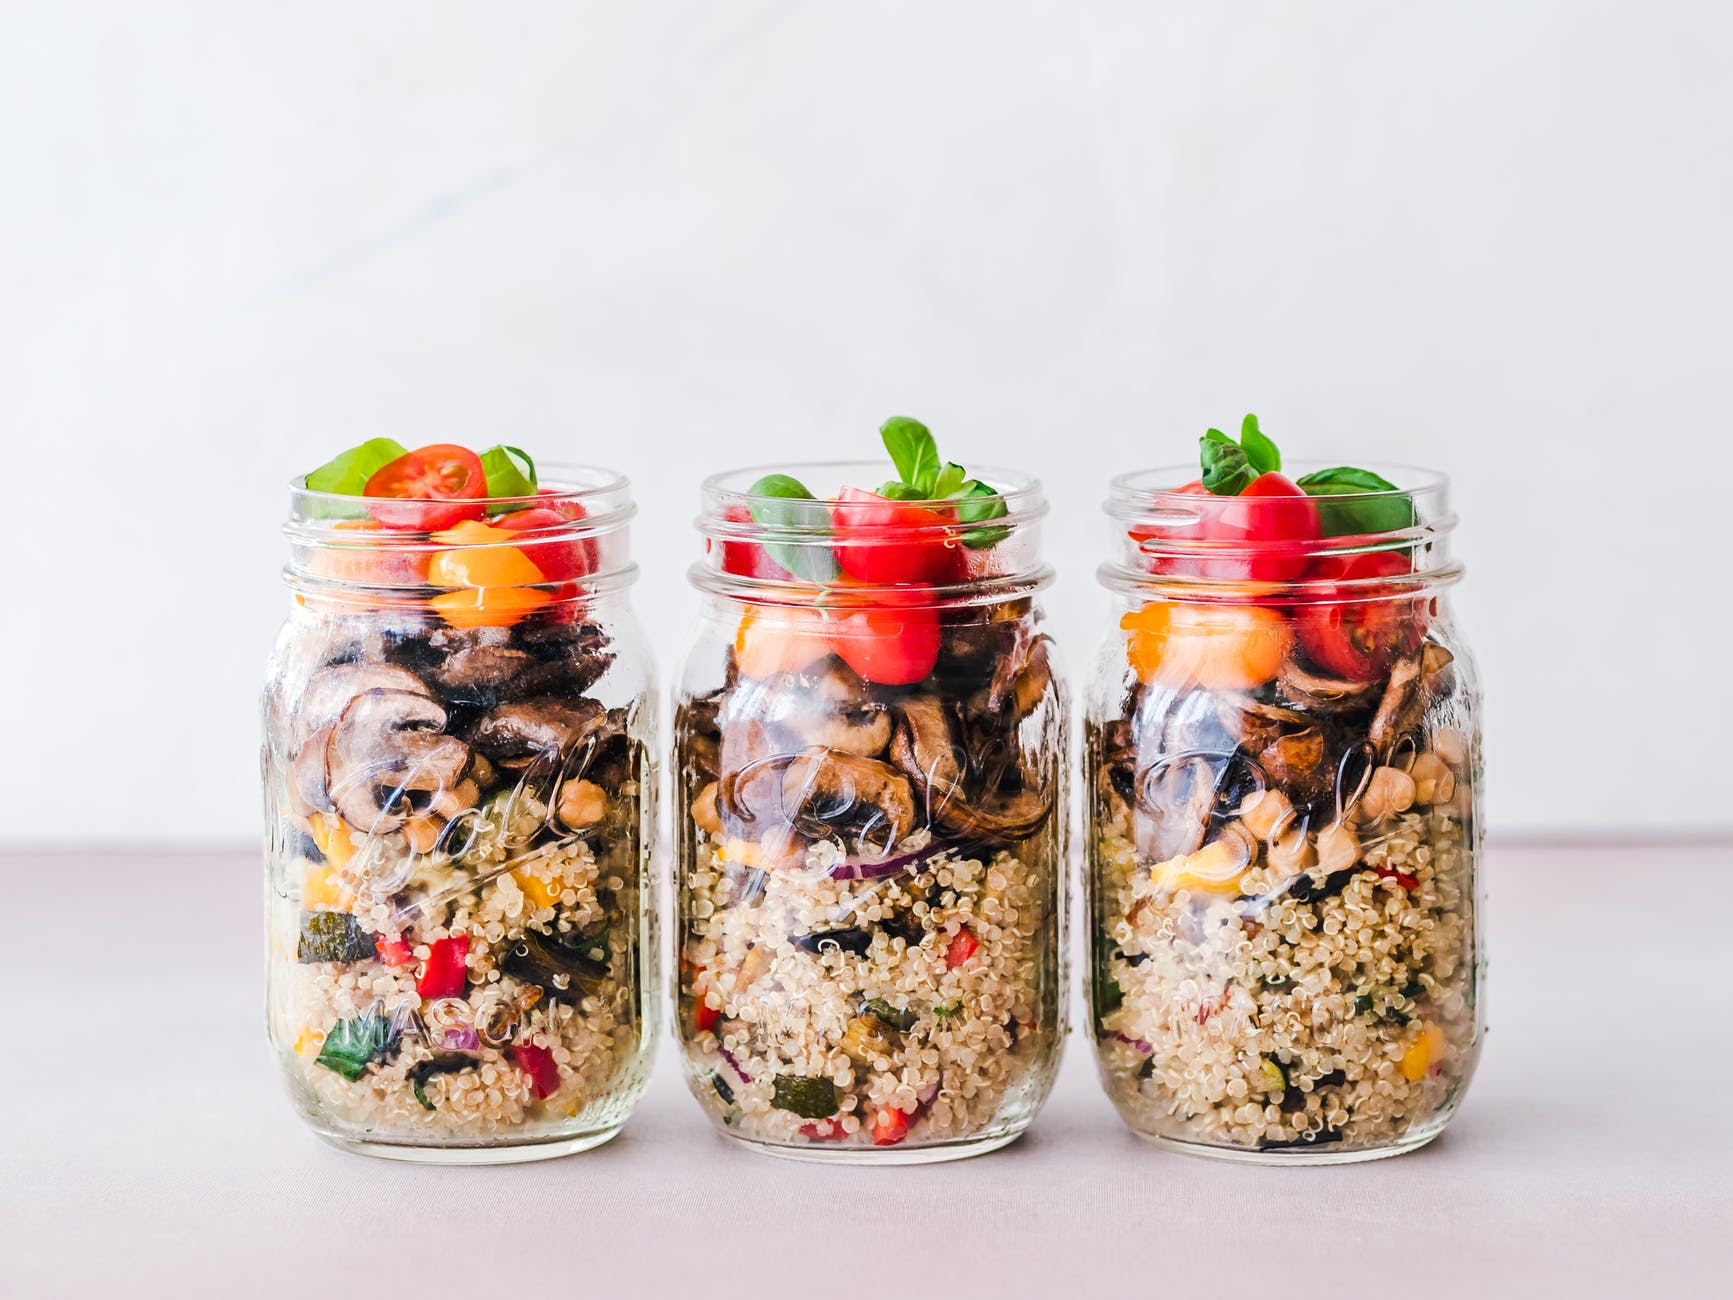 three glass canning jars filled with a mix of quinoa, peppers, mushrooms, tomatoes and herbs